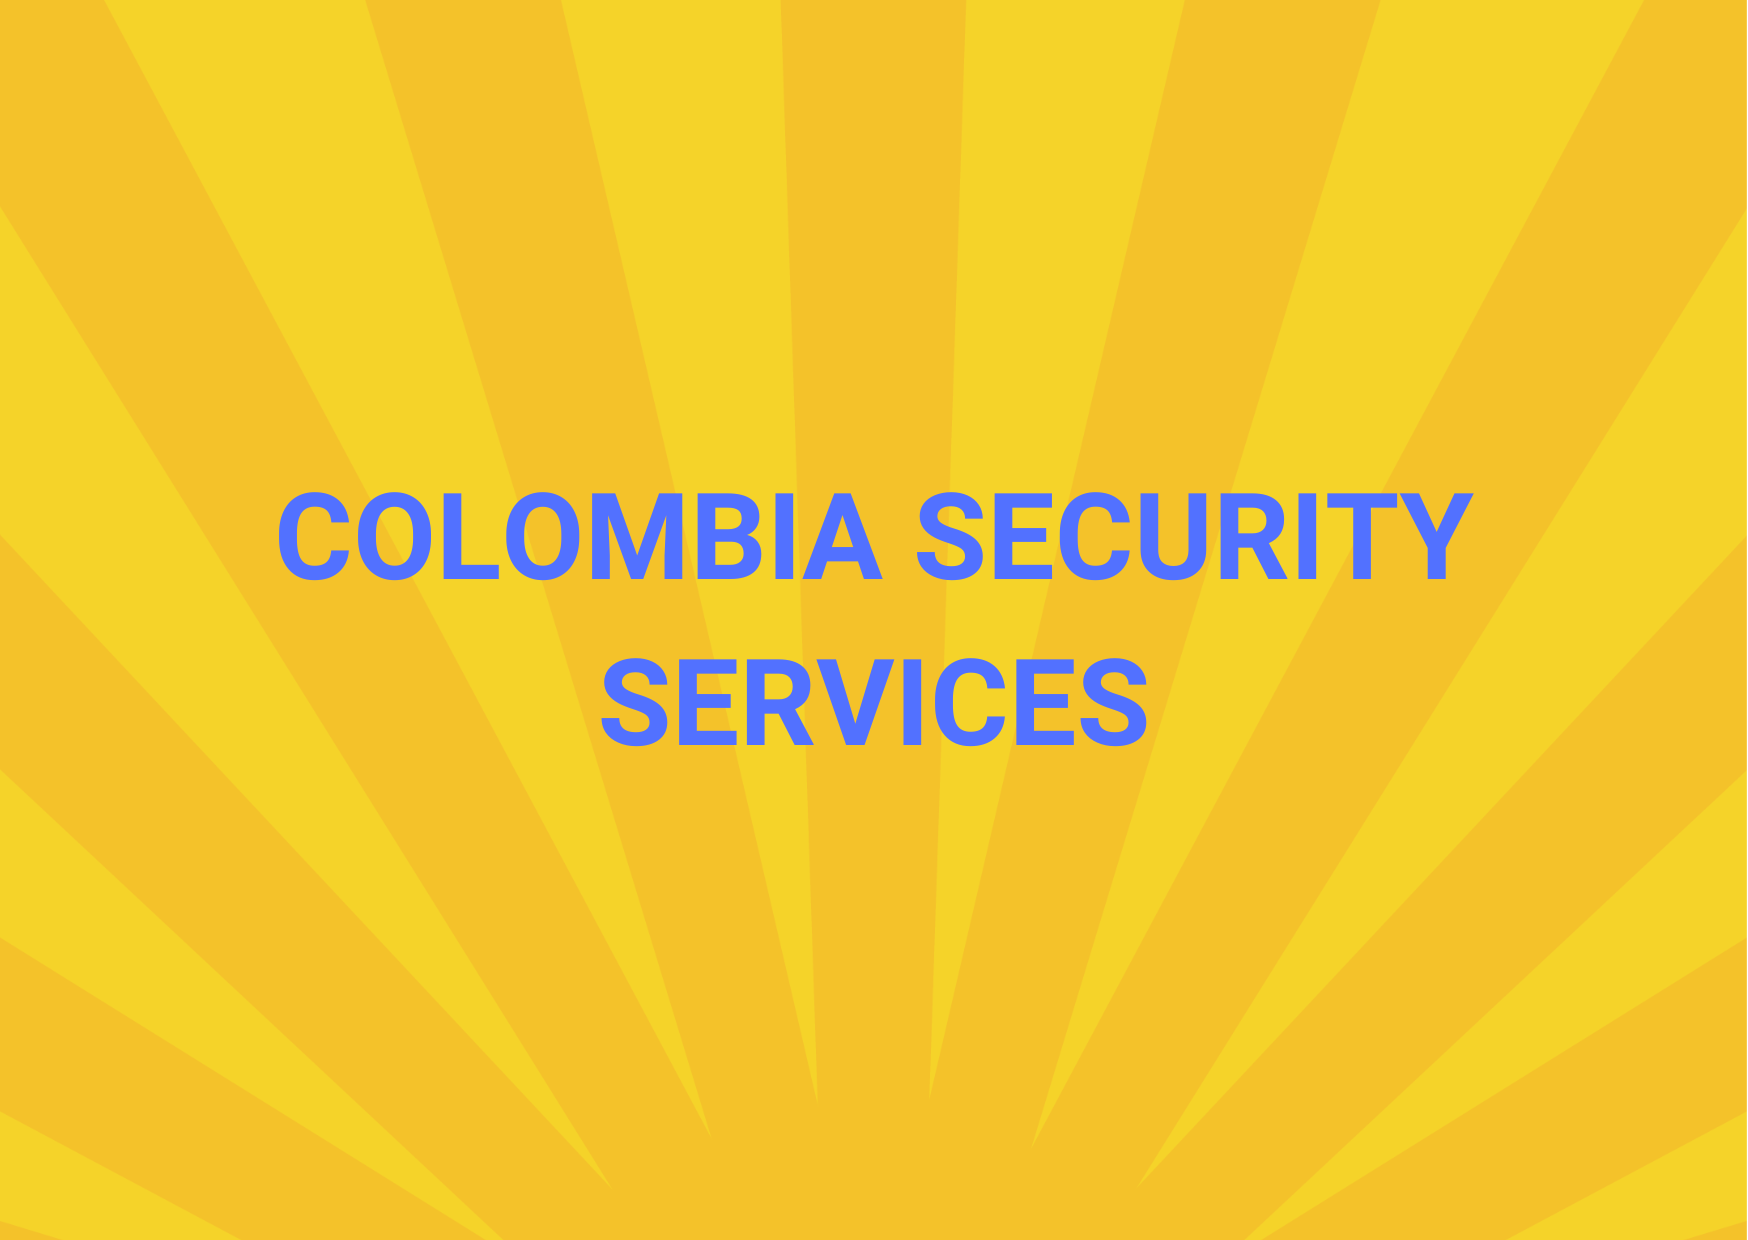  COLOMBIA SECURITY SERVICES,   